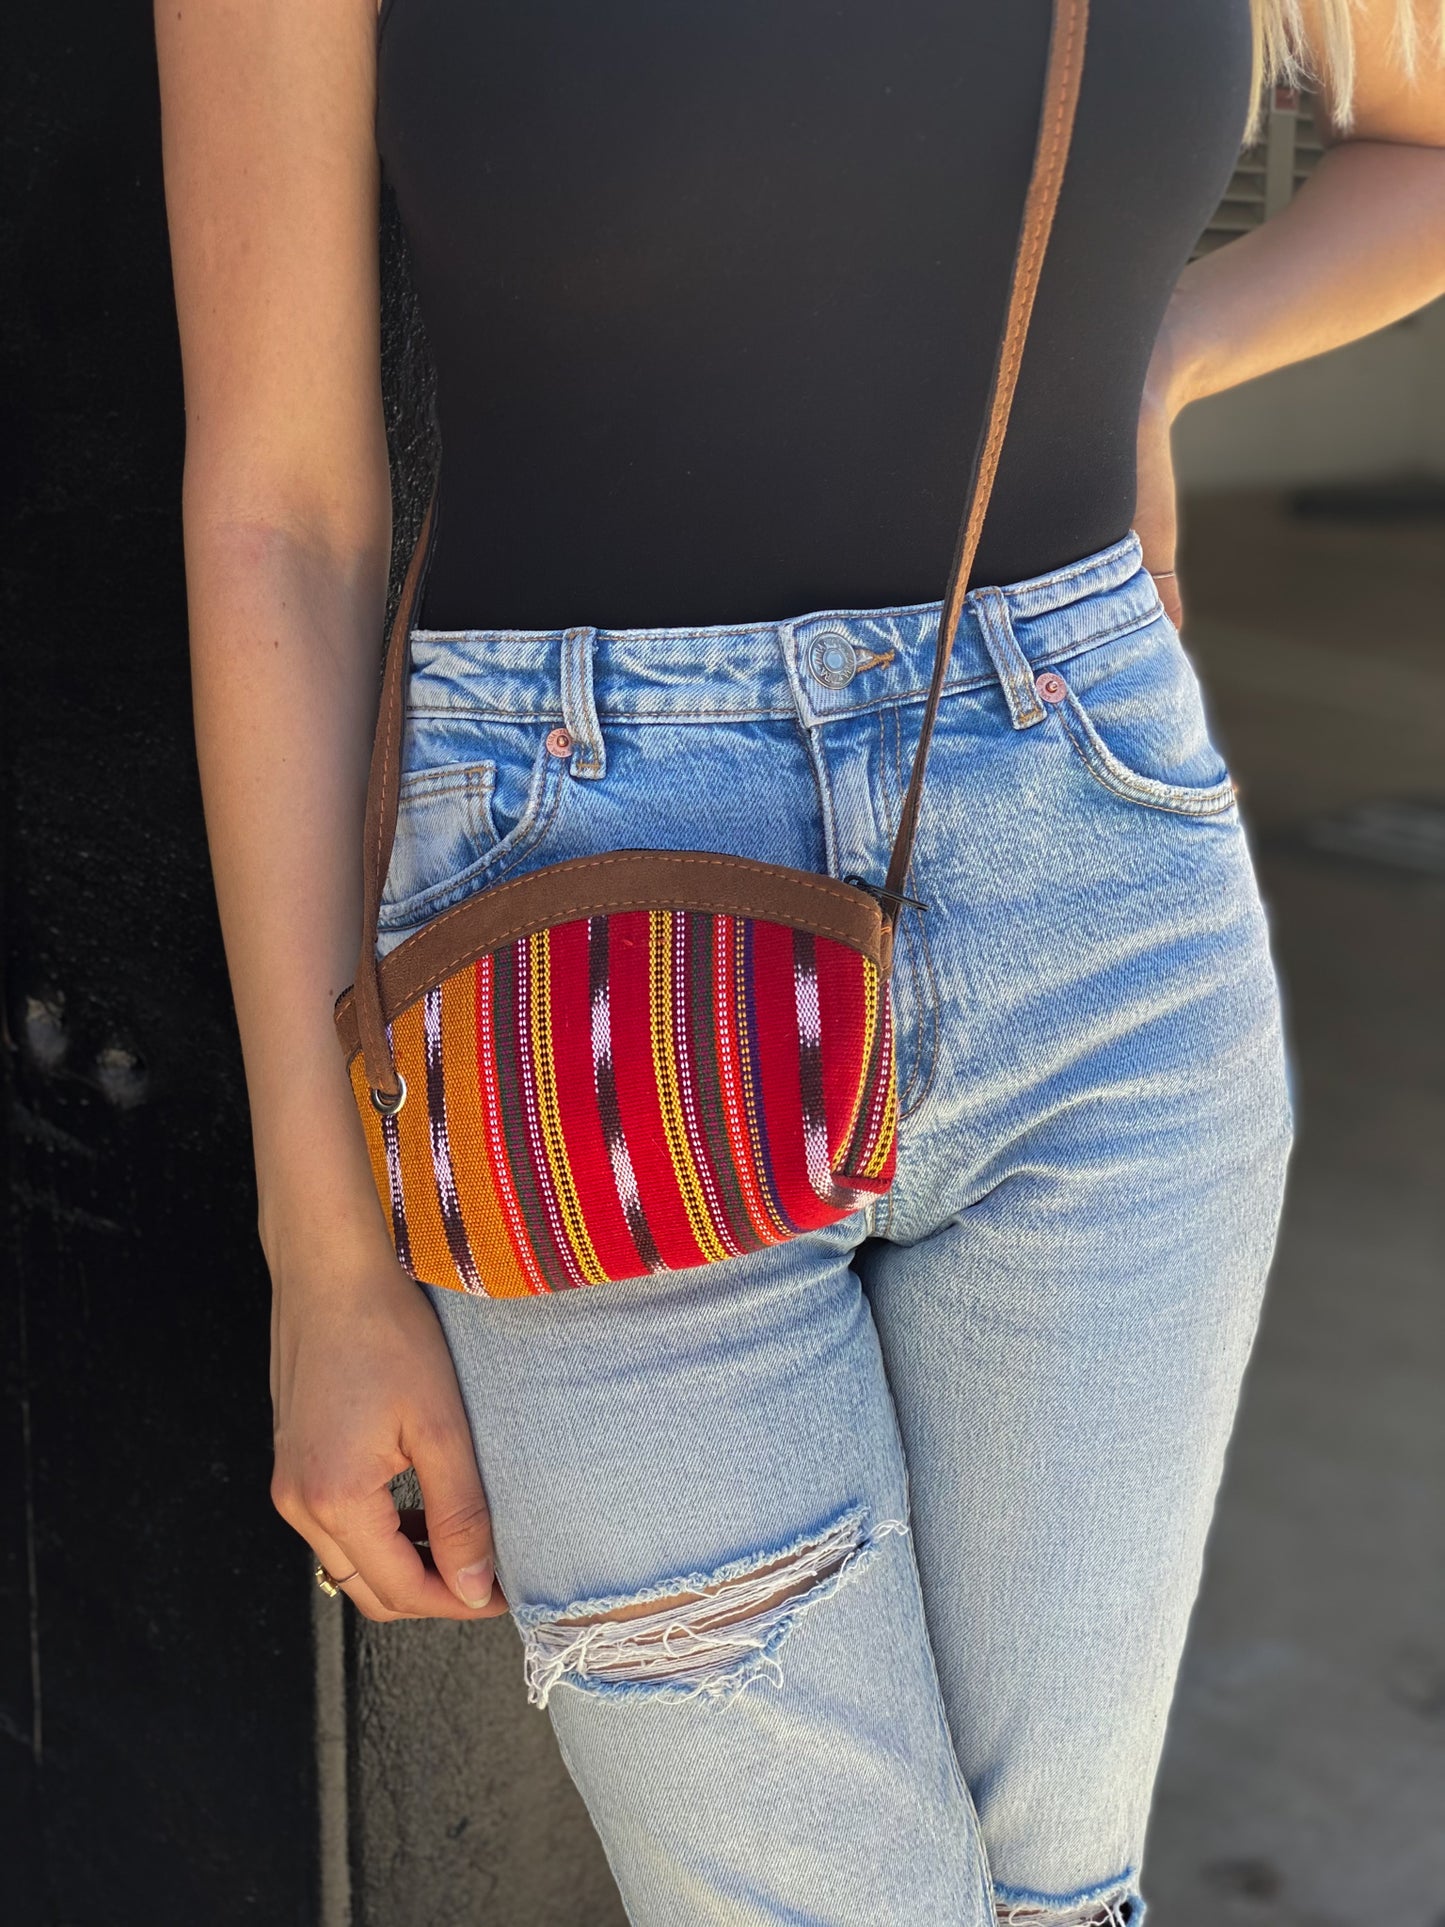 Handmade in Guatemala Small Crossbody Bag. Handwoven intricate fabric. Vibrant colors and faux suede straps and detail. Front zipper closure. Perfect for summer and super lightweight.